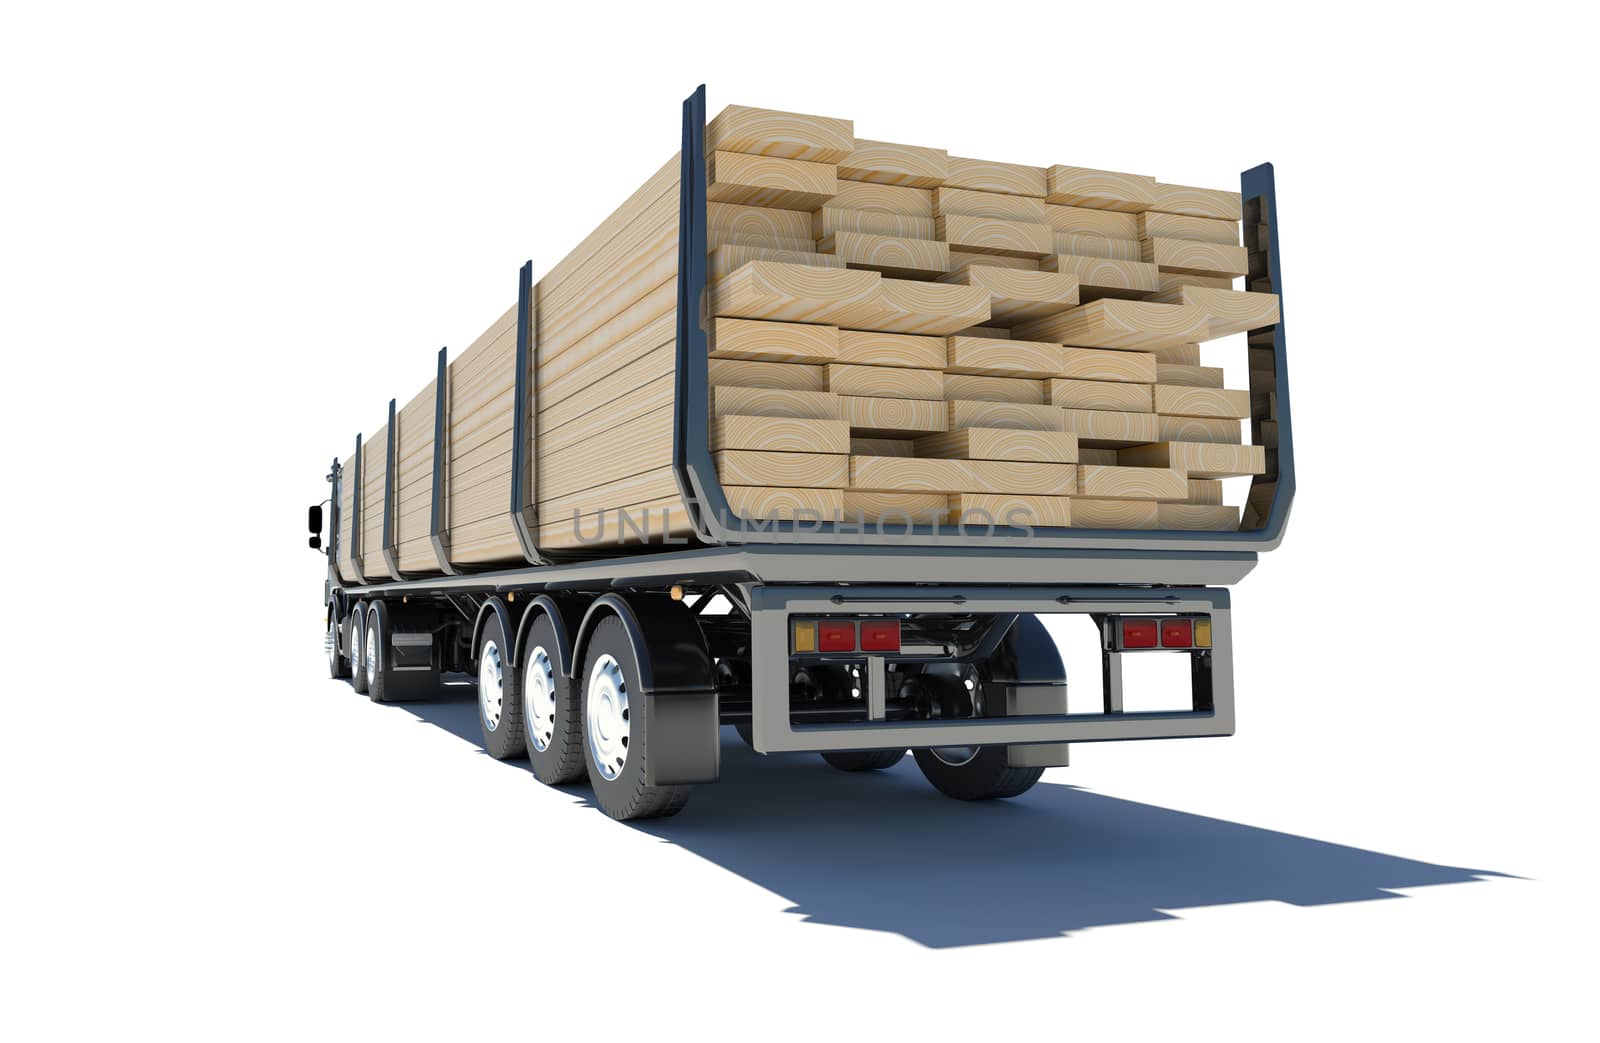 Truck transporting lumber. Rear view. Isolated render on a white background